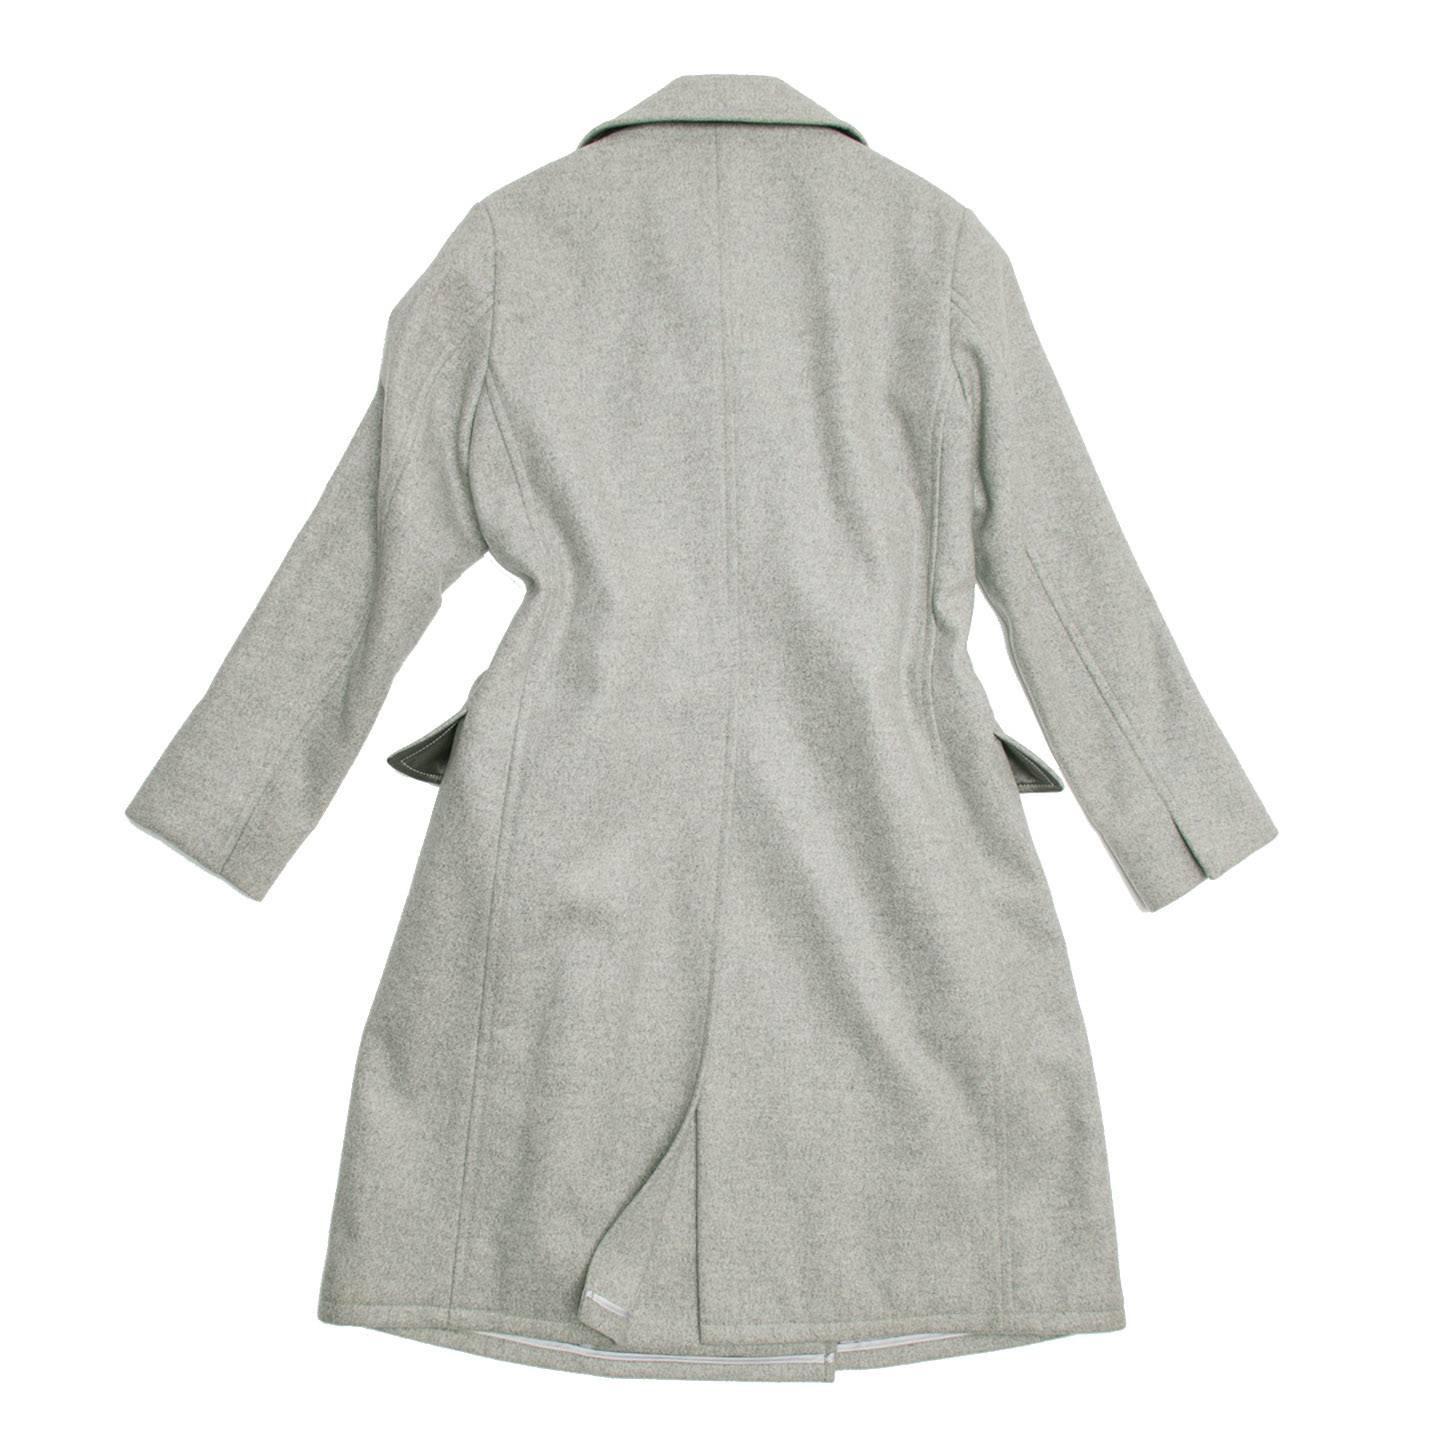 Jil Sander Grey Cashmere Trench Coat In Excellent Condition For Sale In Brooklyn, NY